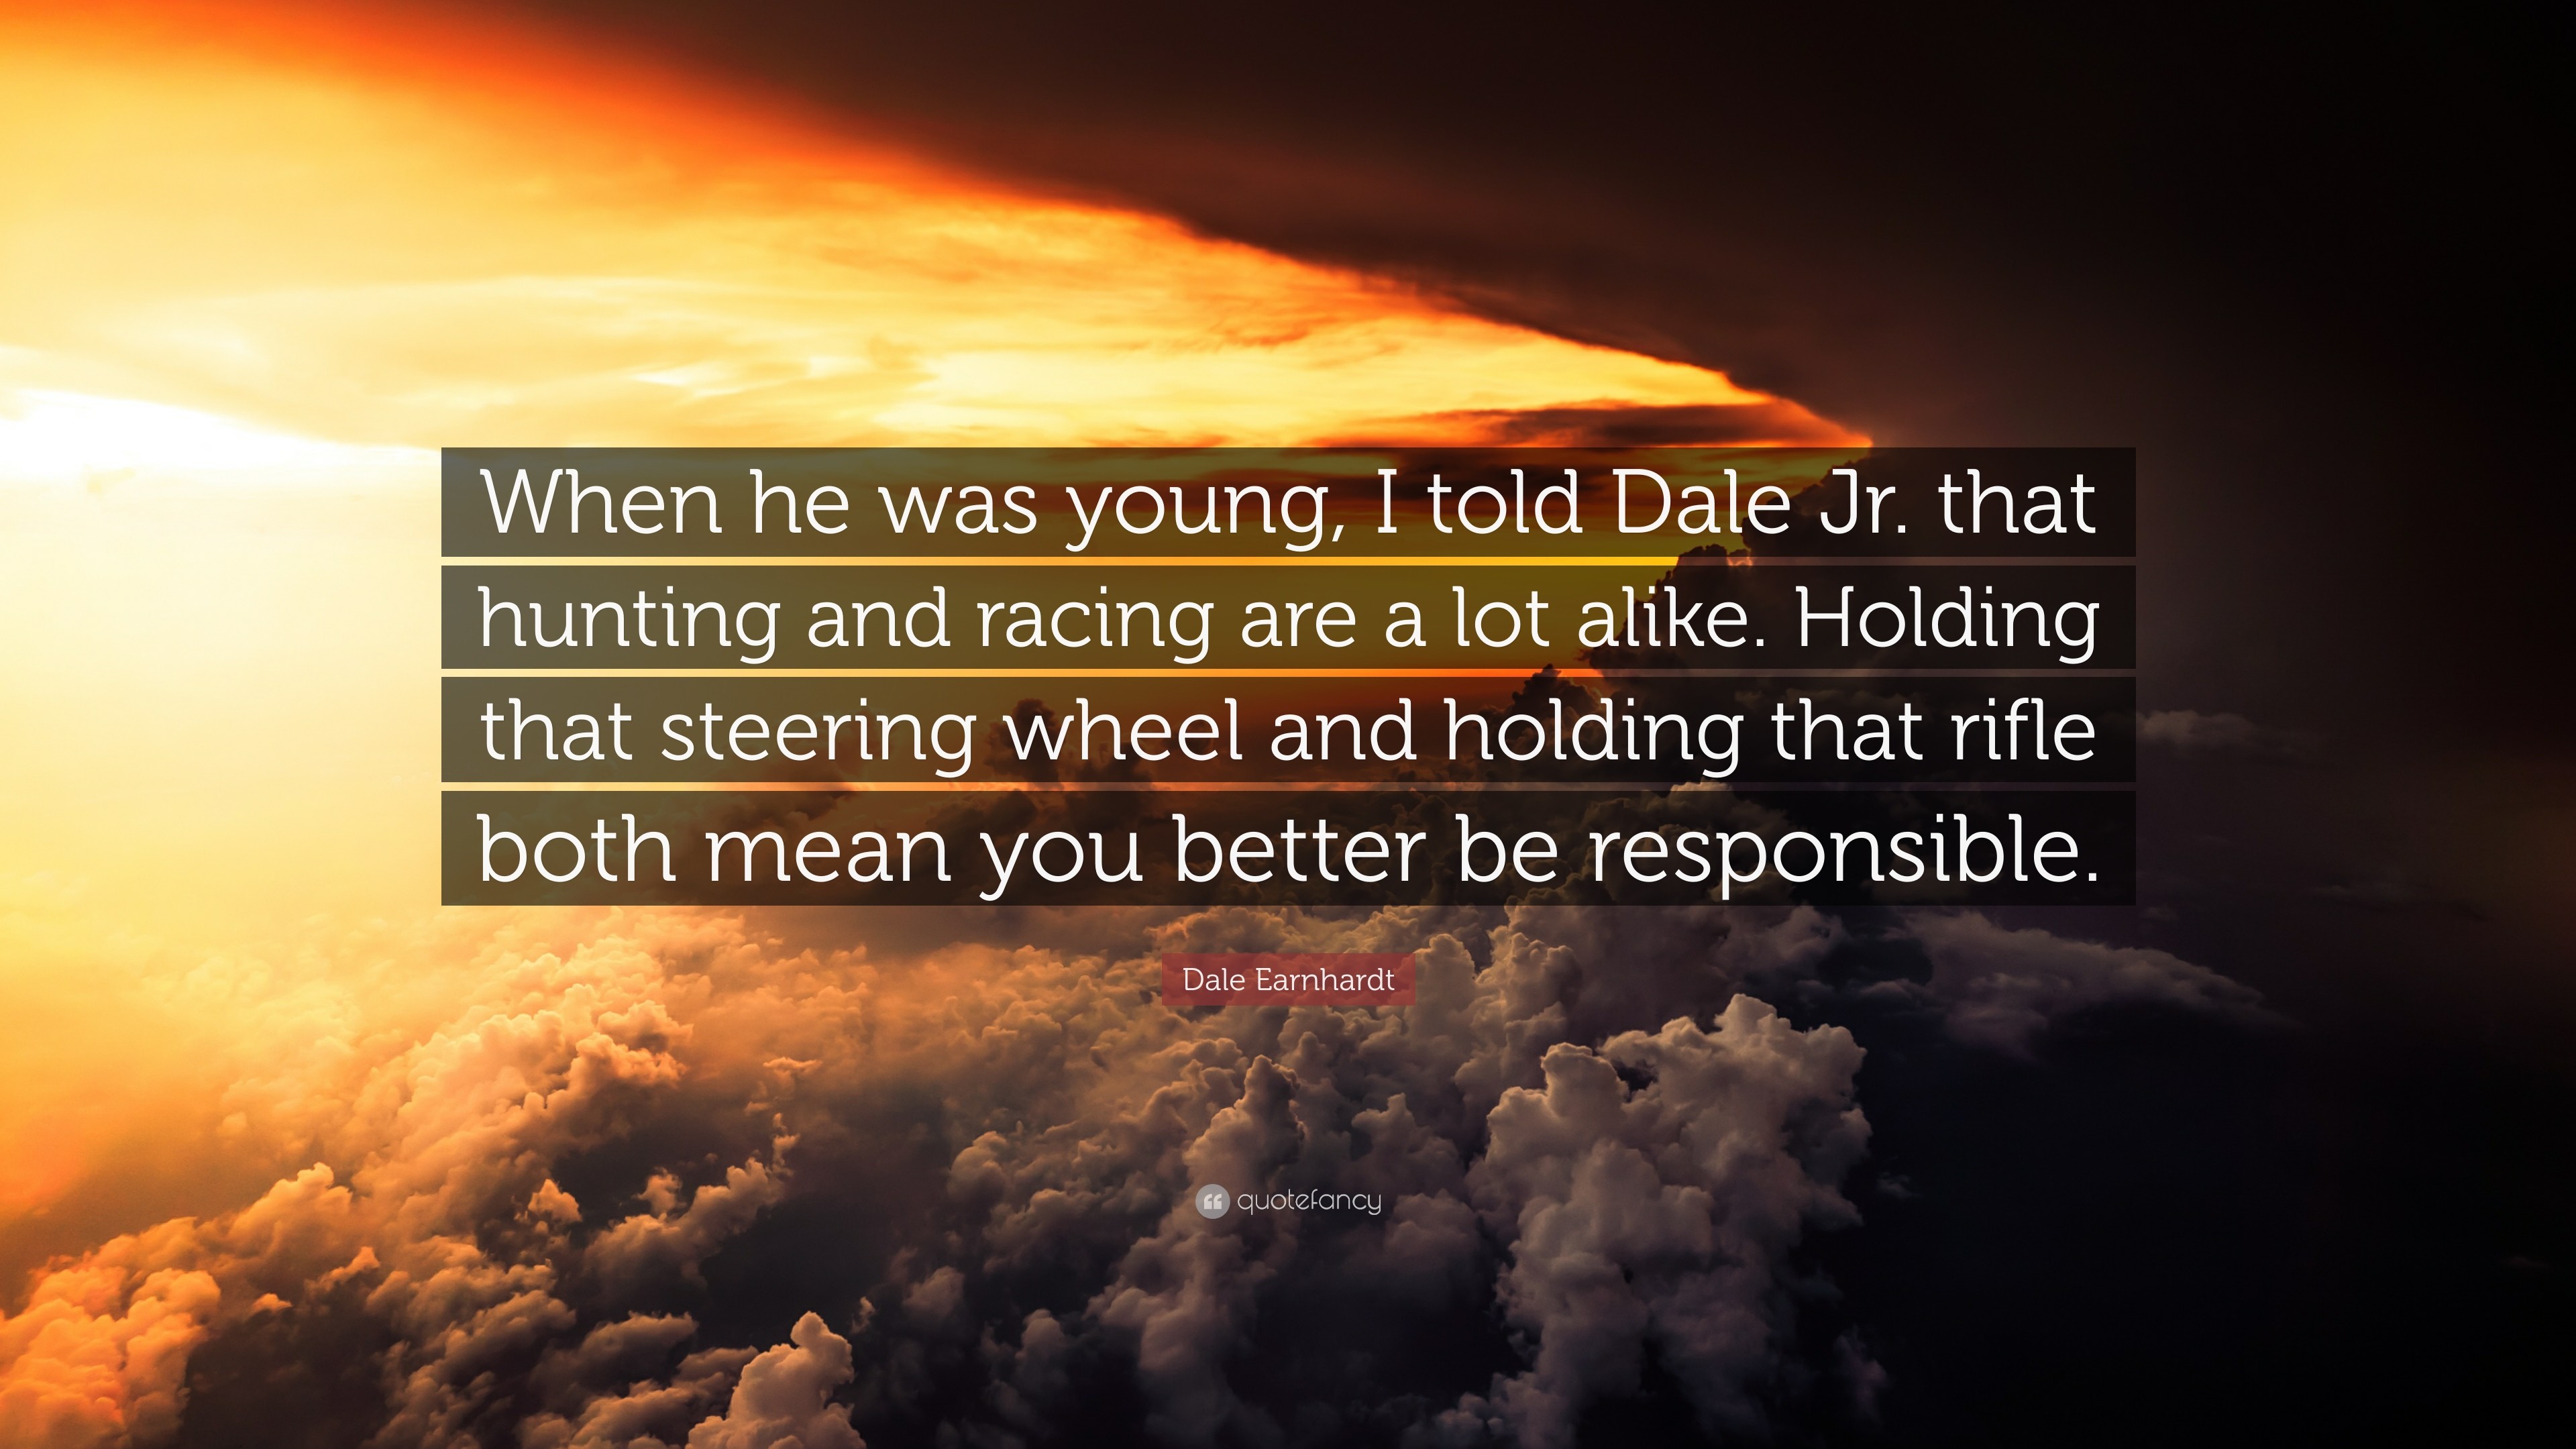 3840x2160 Dale Earnhardt Quote: “When he was young, I told Dale Jr. that